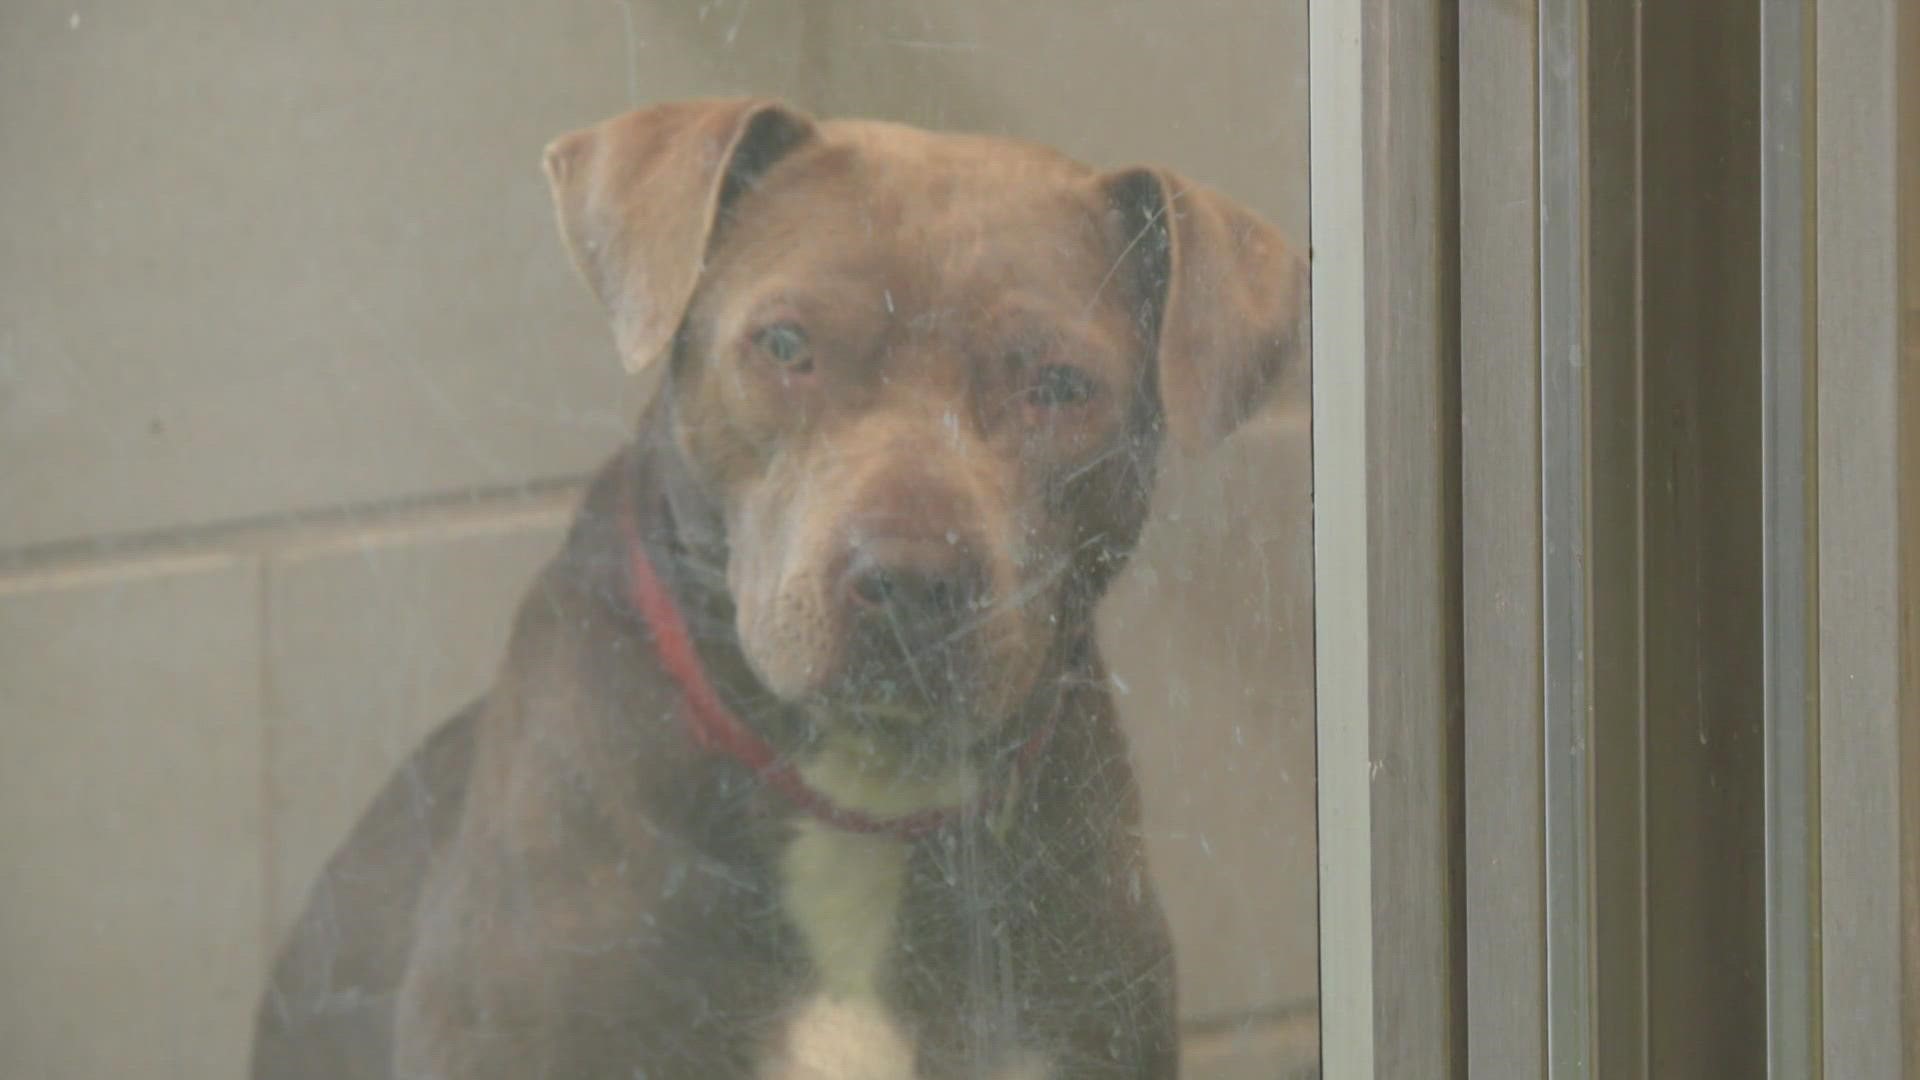 The shelter said Monday it is considering euthanizing 15 dogs that "are sick, suffering or are dangerous" as a result of the capacity numbers.